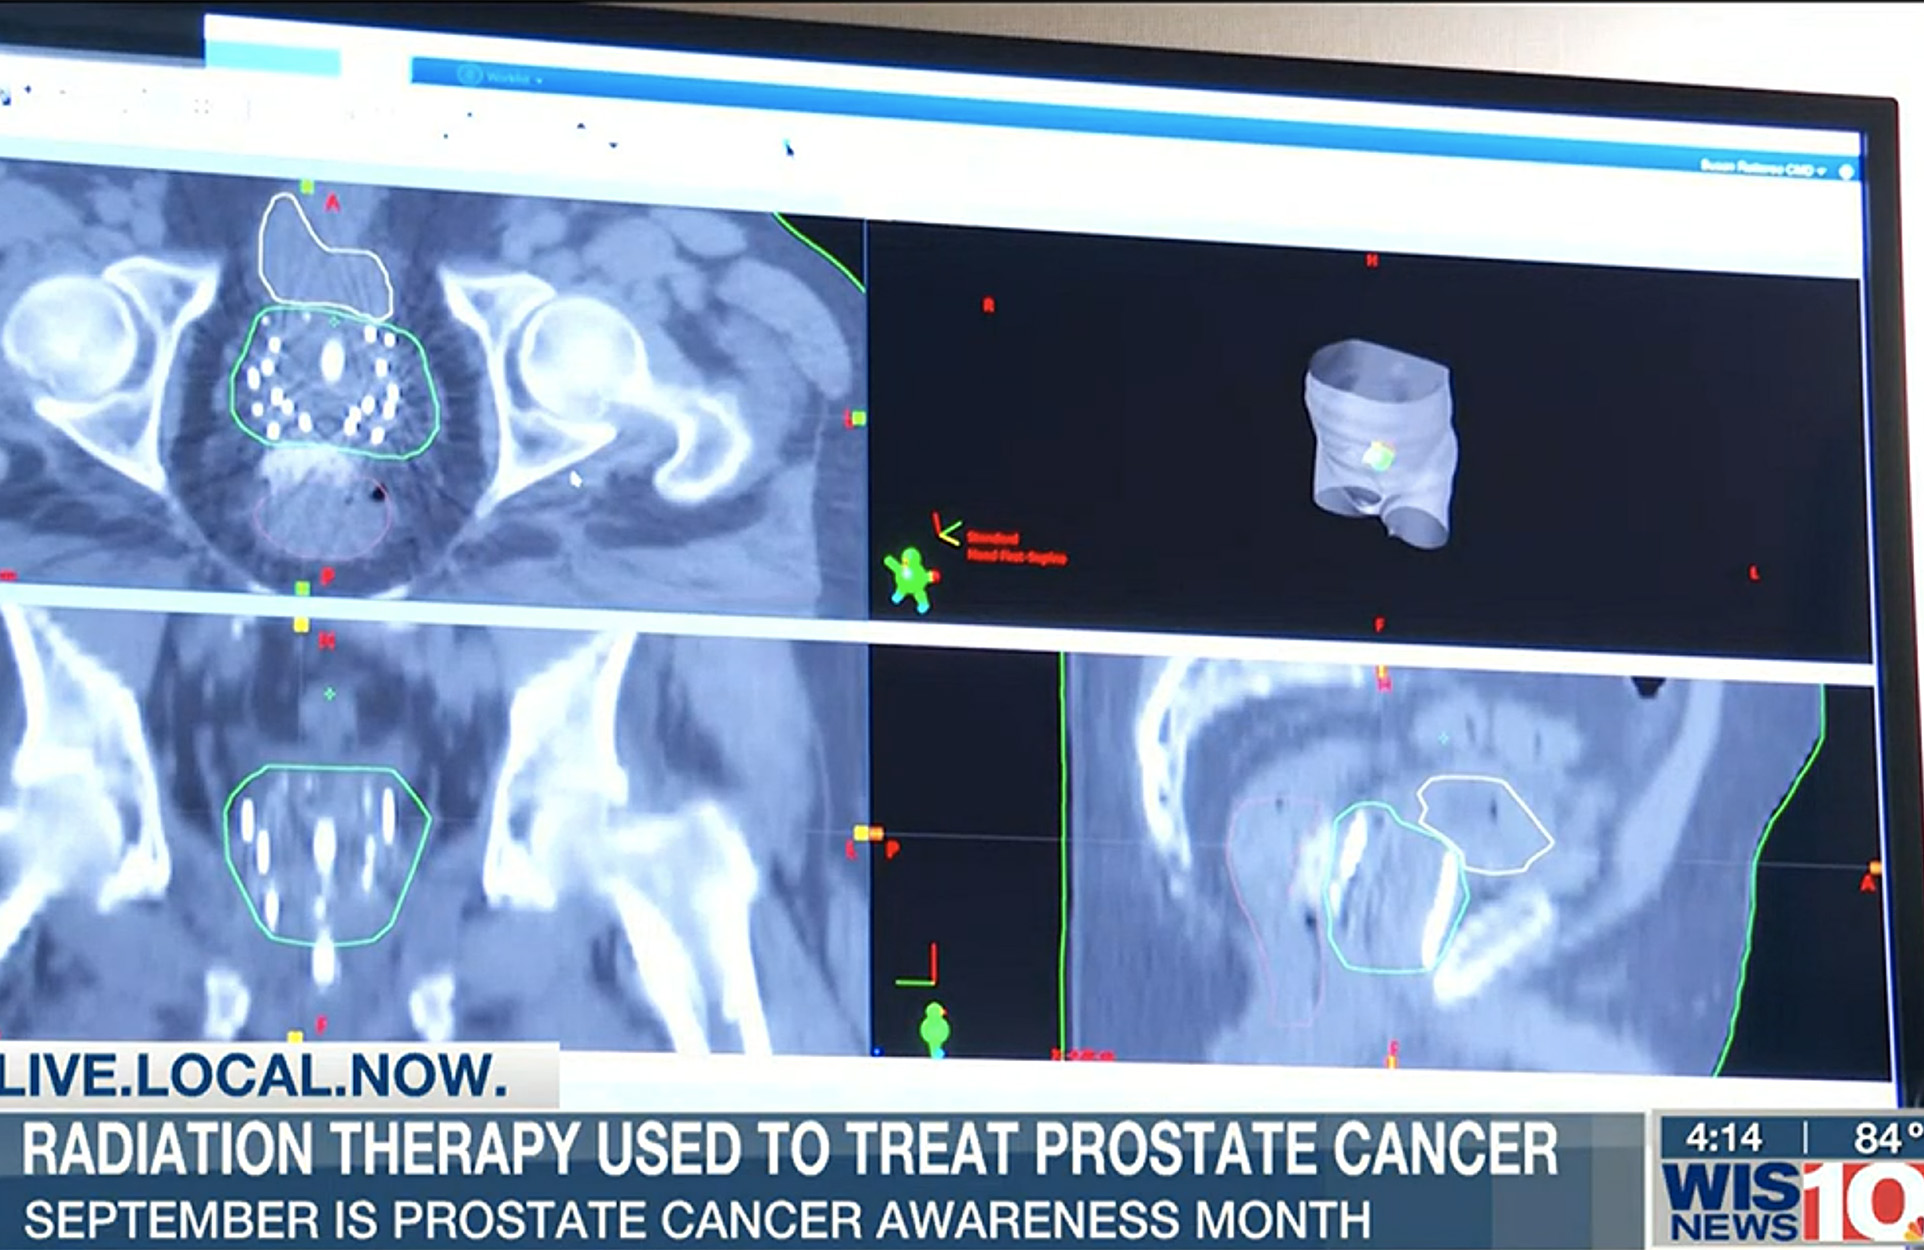 MRI of radioactive seeds implanted in prostate